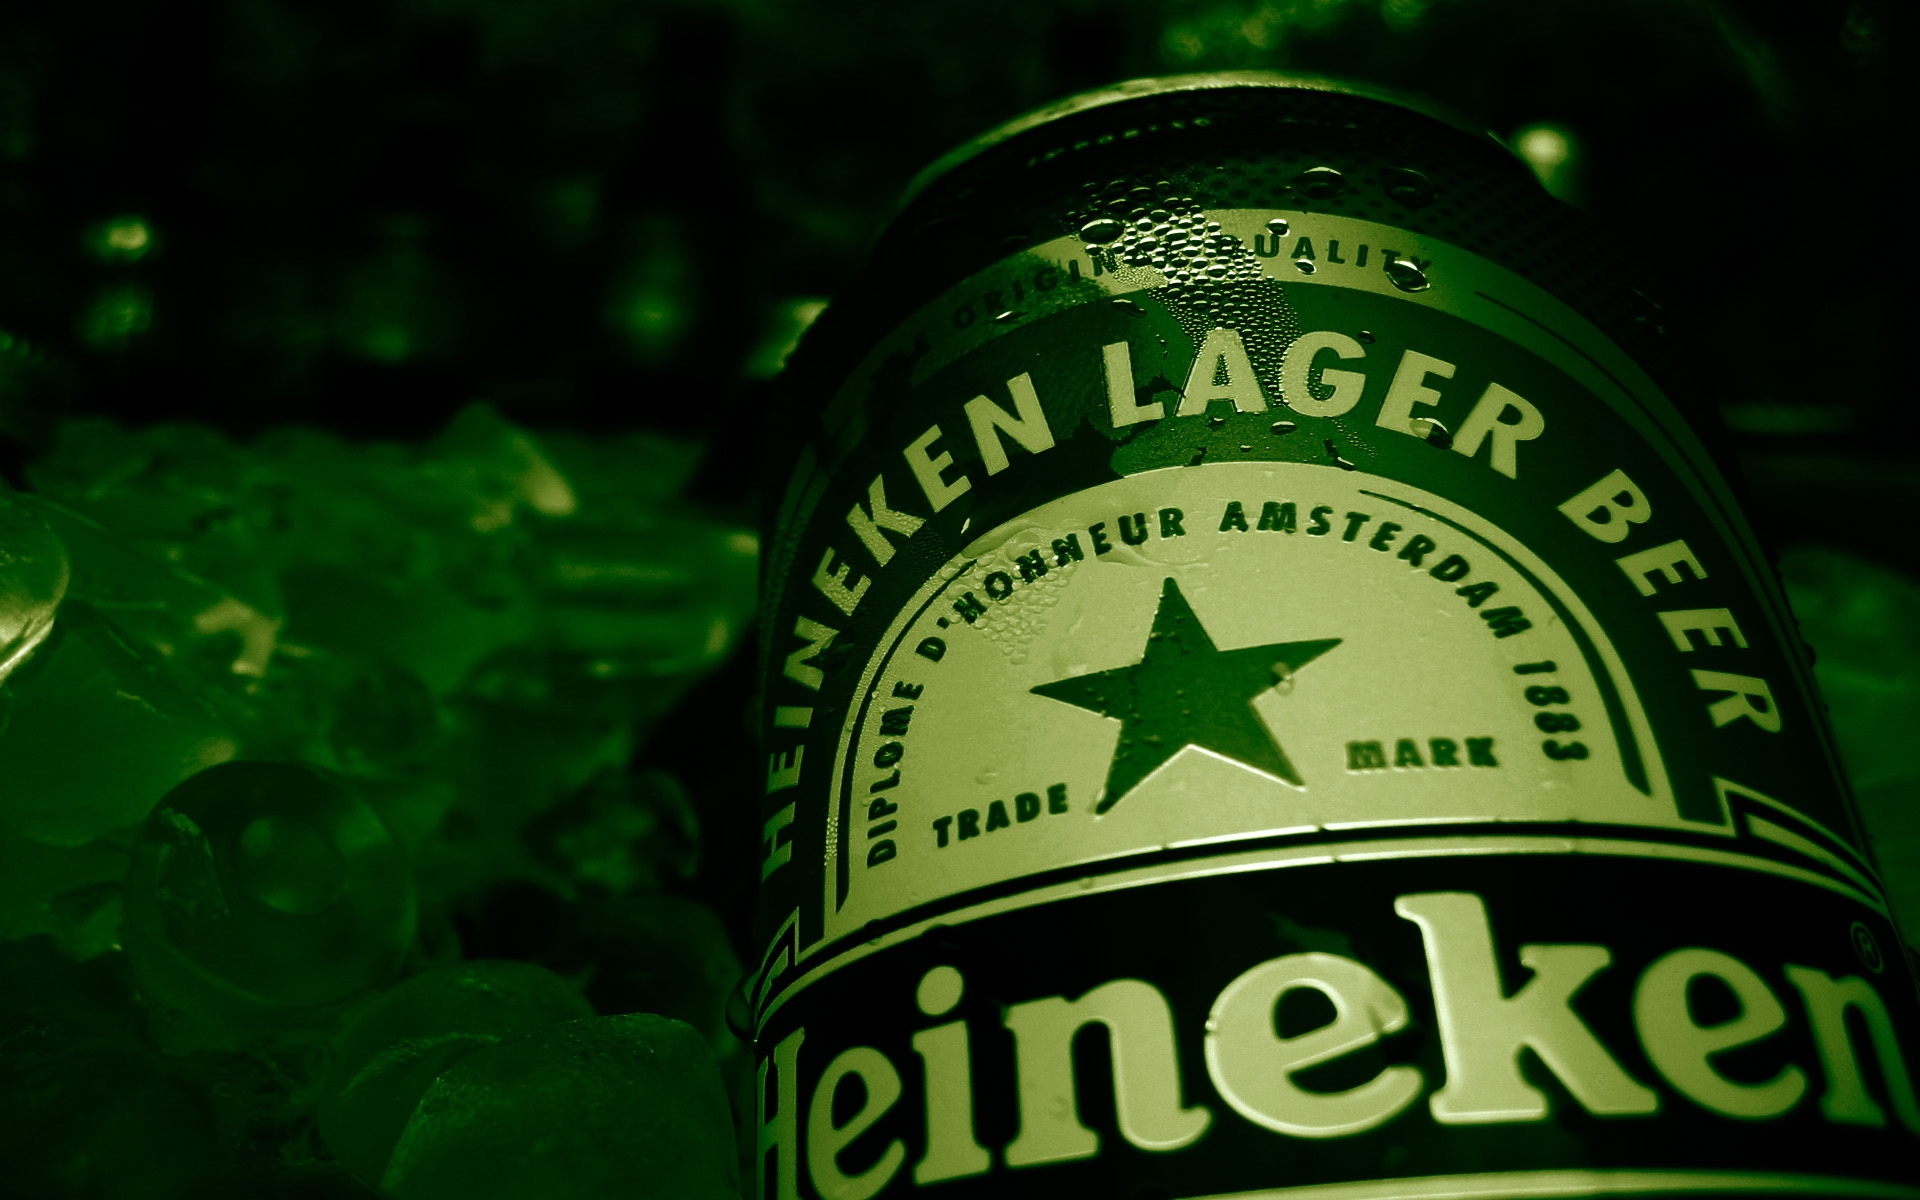 Heineken 4K wallpaper for your desktop or mobile screen free and easy to download